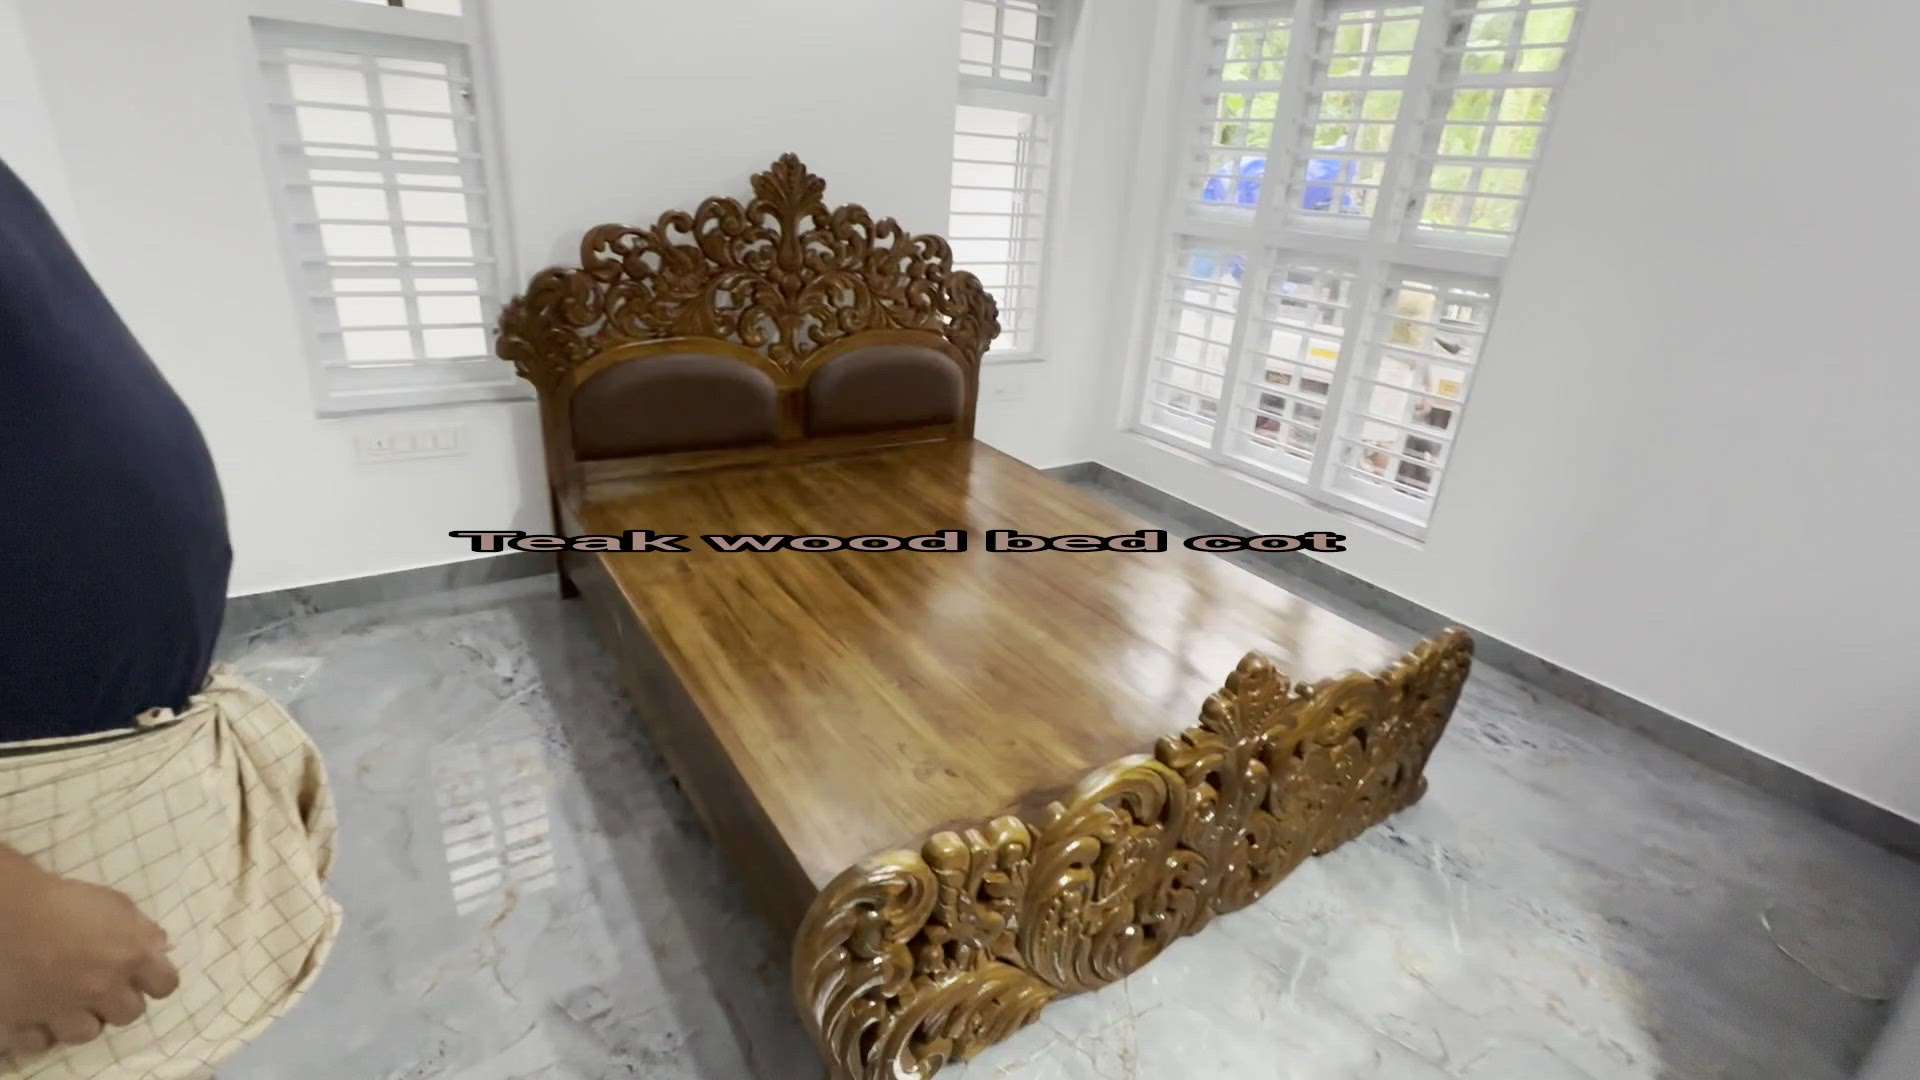 ROYAL TEAK WOOD BED COT QUEEN SIZE CARVING ANTIQUE DESIGN  
This video shows the footage of a royal elegant queen size bed made of Nilambur teak wood.  We have tried to include each and every step of the work in the video, carving, carpentry, polishing, spraying, and finally, after the assembly is delivered to the customer's home, the video has been included.  You can contact us on our number.

#BedroomDecor  #Furnishings  #MasterBedroom  #LUXURY_INTERIOR  #LUXURY_BED  #wooden
 #TeakWoodDoors 
#furniture #furnituredesign #furniturejepara #furniturejakarta #furnituremurah #furnitureart #furnitureassembly #furnitureantique #furnitureapartemen #furnitureaccessories #afurniture #afurniturefetish #afurnituremaker #afurniturestory #afurniturecompany #furniturebali #furniturebanjarmasin #furniturebanten #furniturebandarlampung #furniturebesi #bfurniture #bfurnituremalang #bfurniturehouse #bfurniturestore #bfurniturecompany #furniturecustom #furniturecafe #furnitureclassic